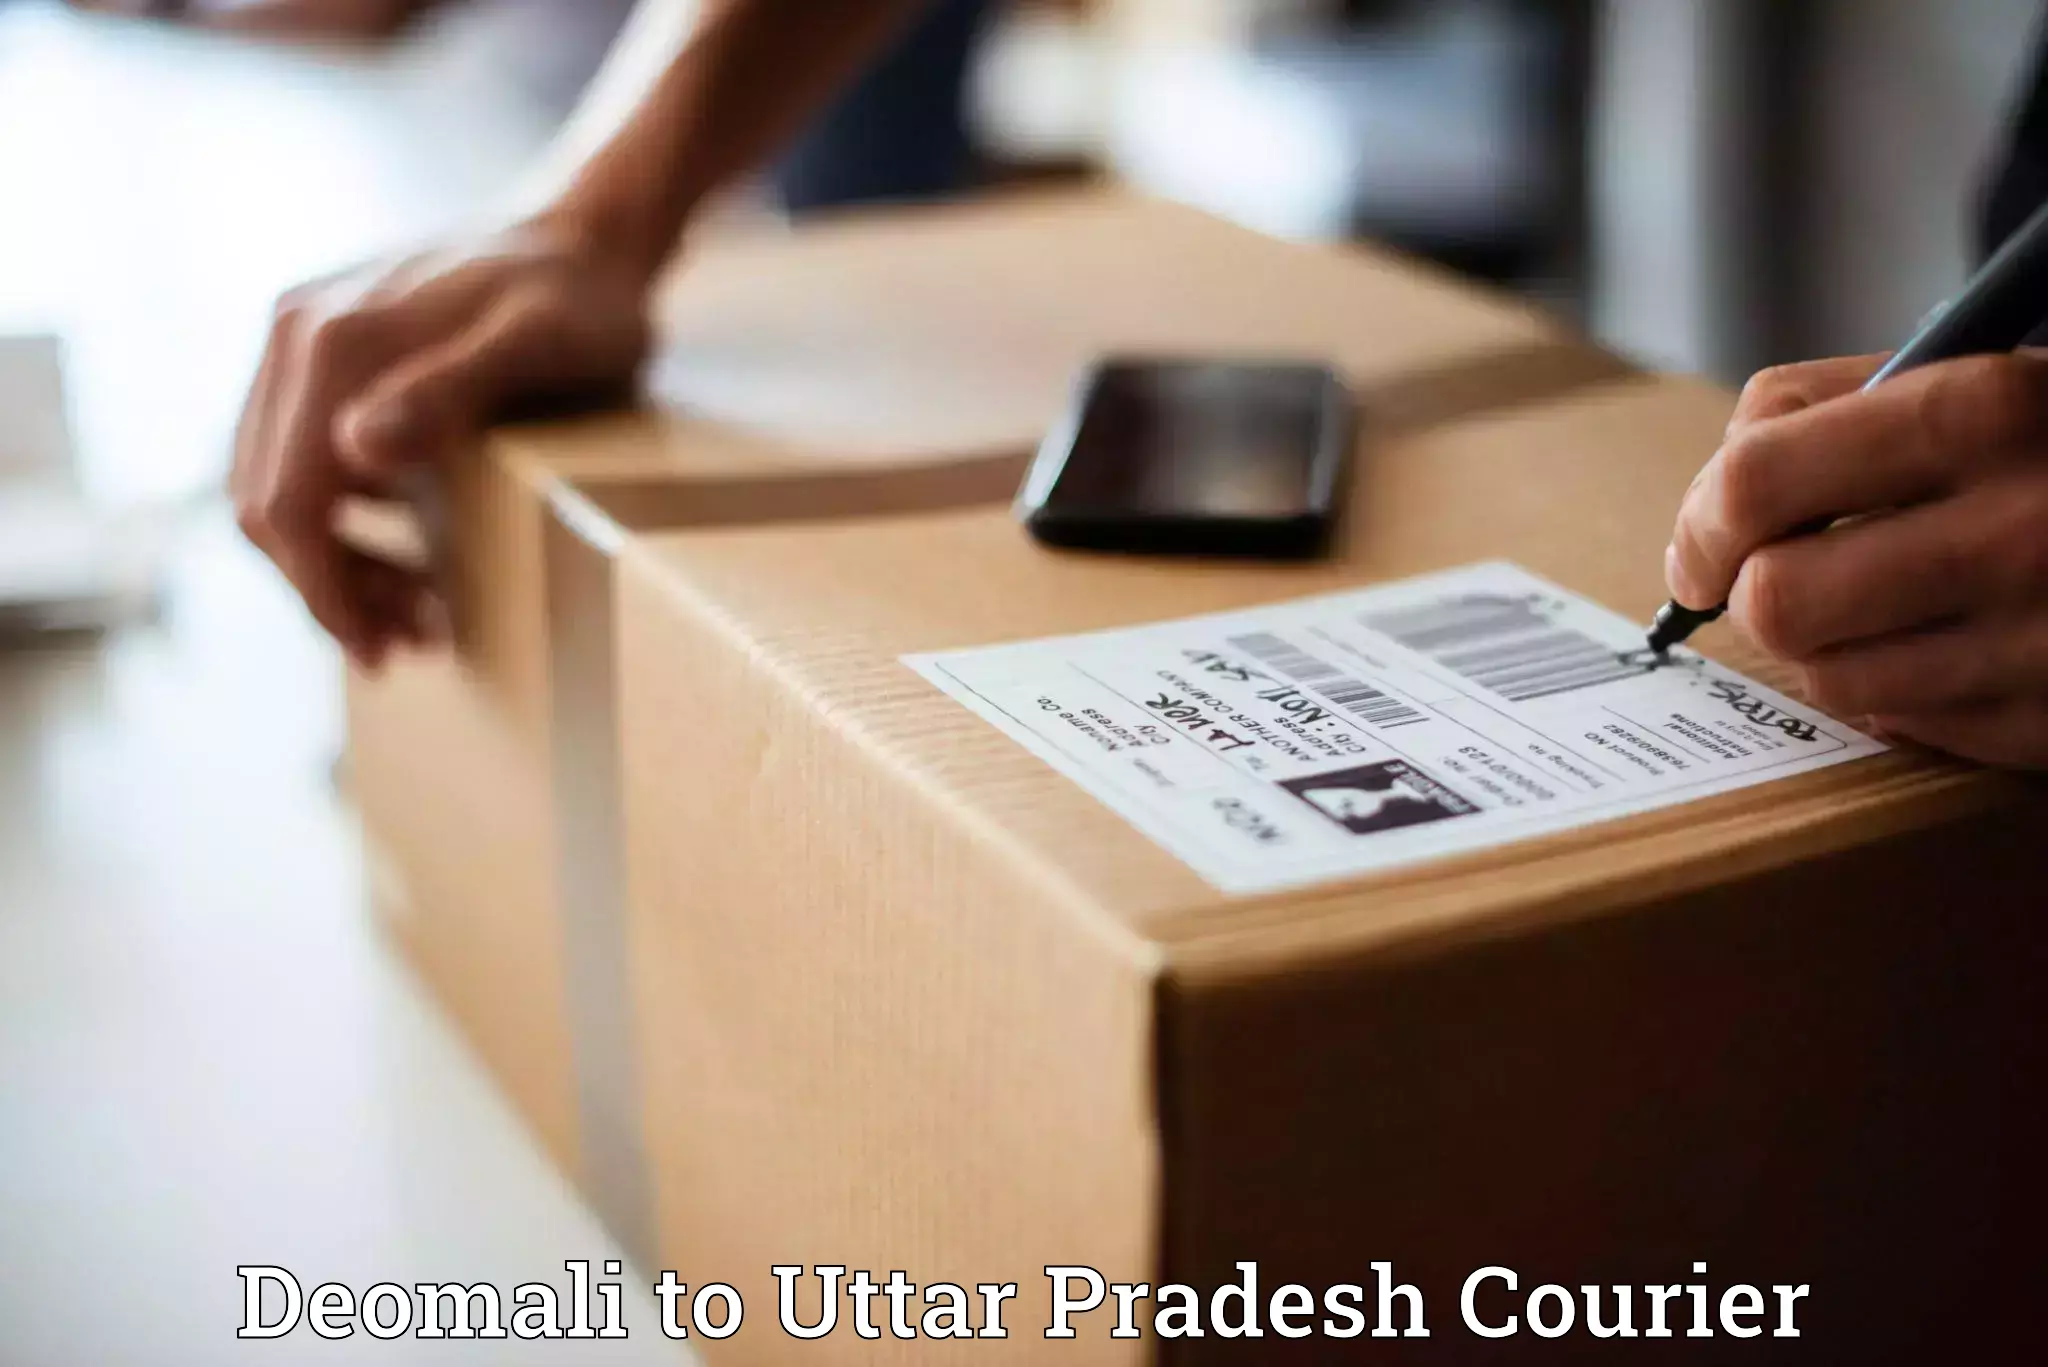 High-priority parcel service Deomali to Khalilabad